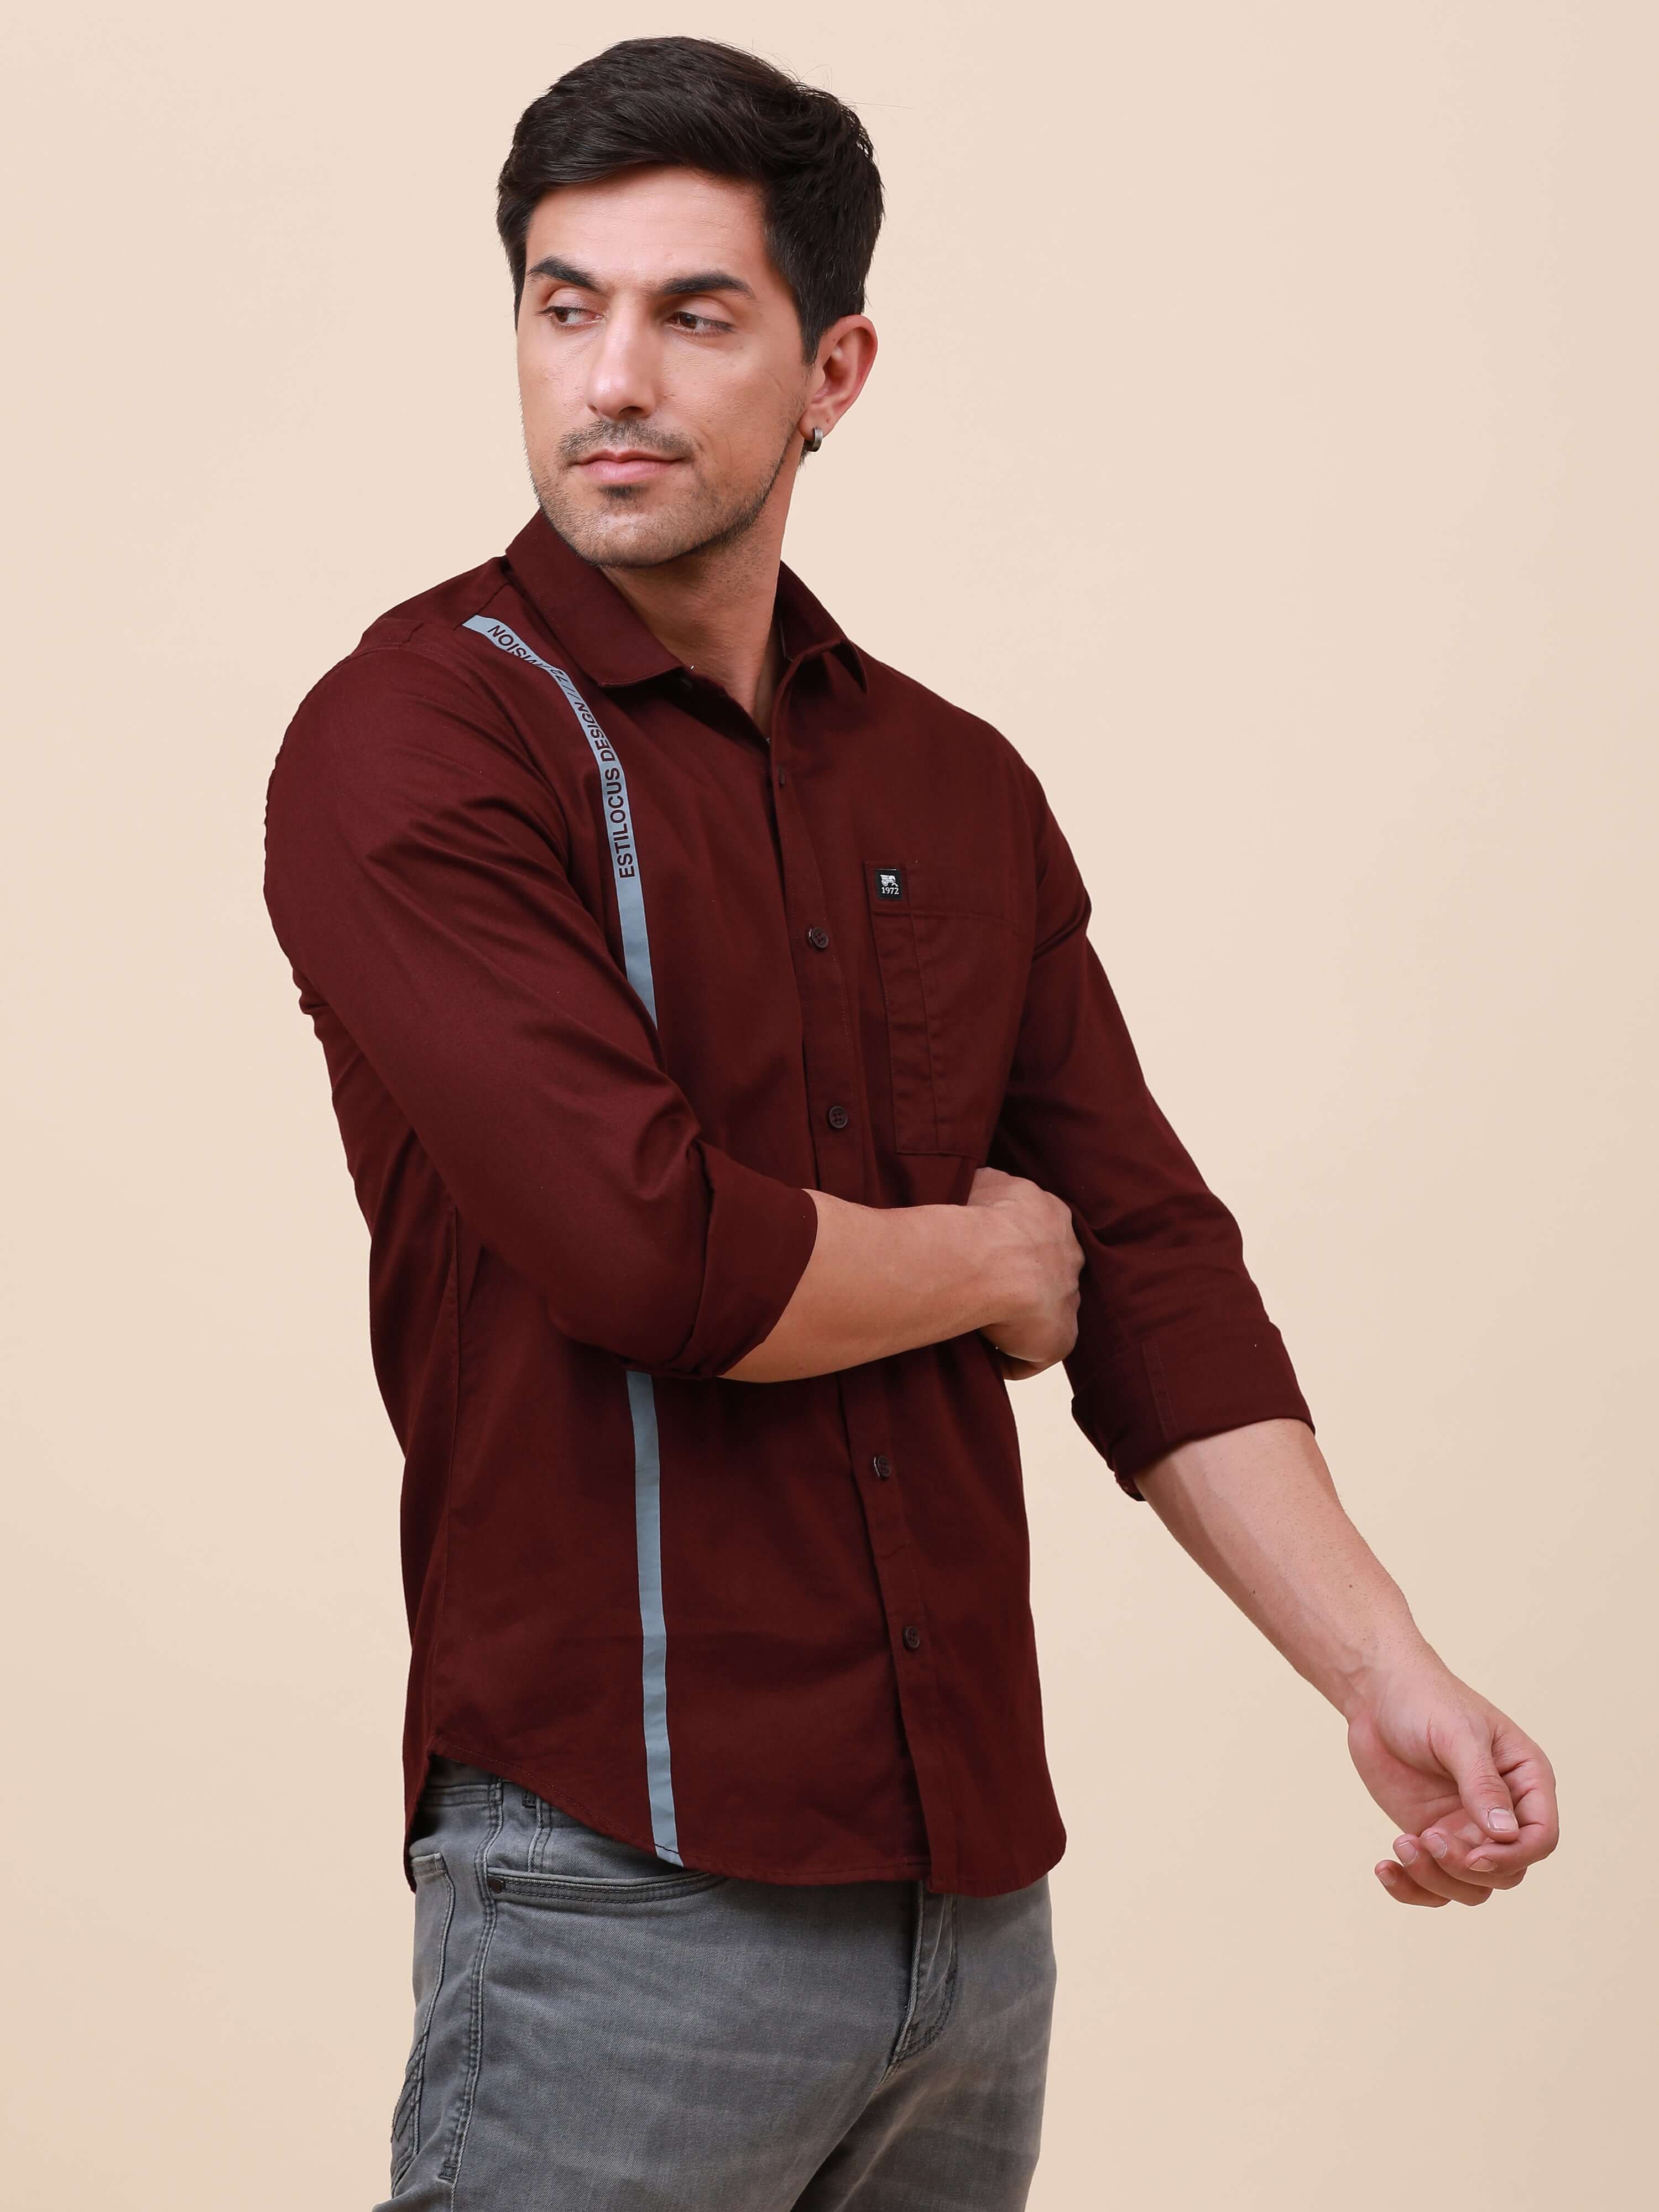 Plum Solid Single Pocket Shirt shop online at Estilocus. 100% Cotton ,Full-sleeve solid shirt Cut and sew placket Regular collar Double button edge cuff Single pocket Curved bottom hemline Finest printing at front placket. All double needle construction,